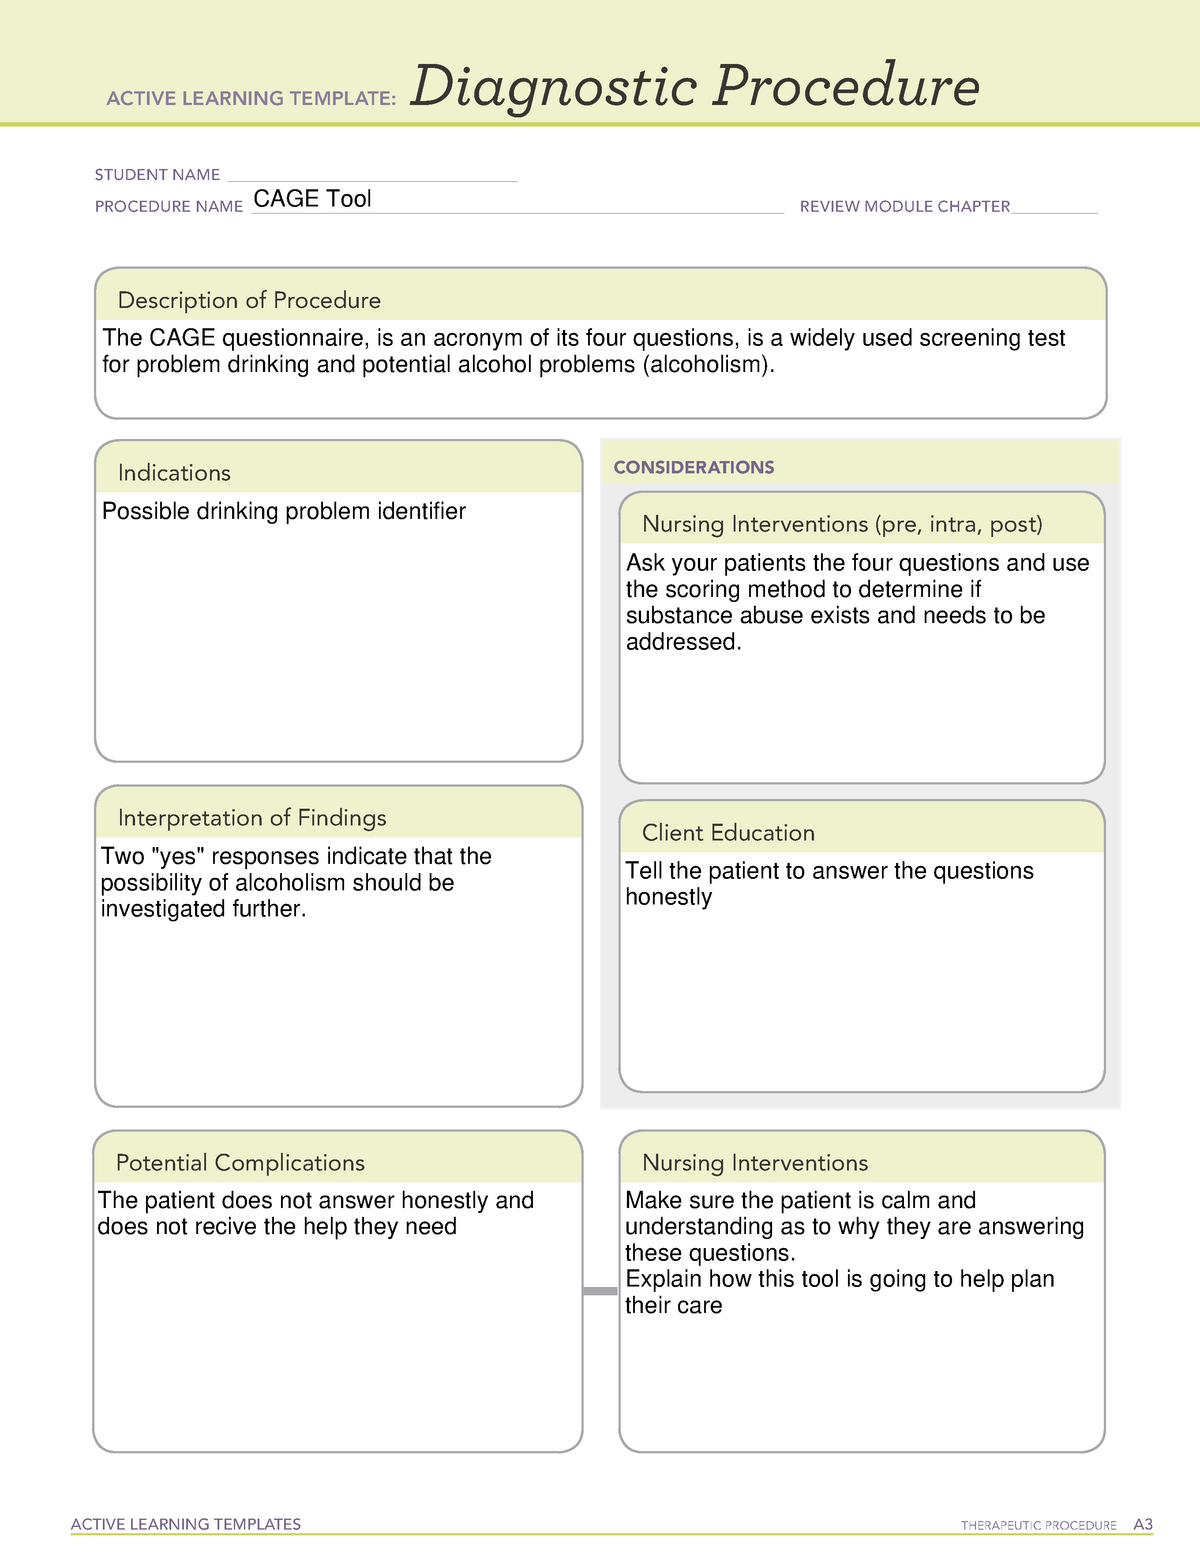 Active Learning Template Diagnostic Procedure form CAGE 2 ACTIVE